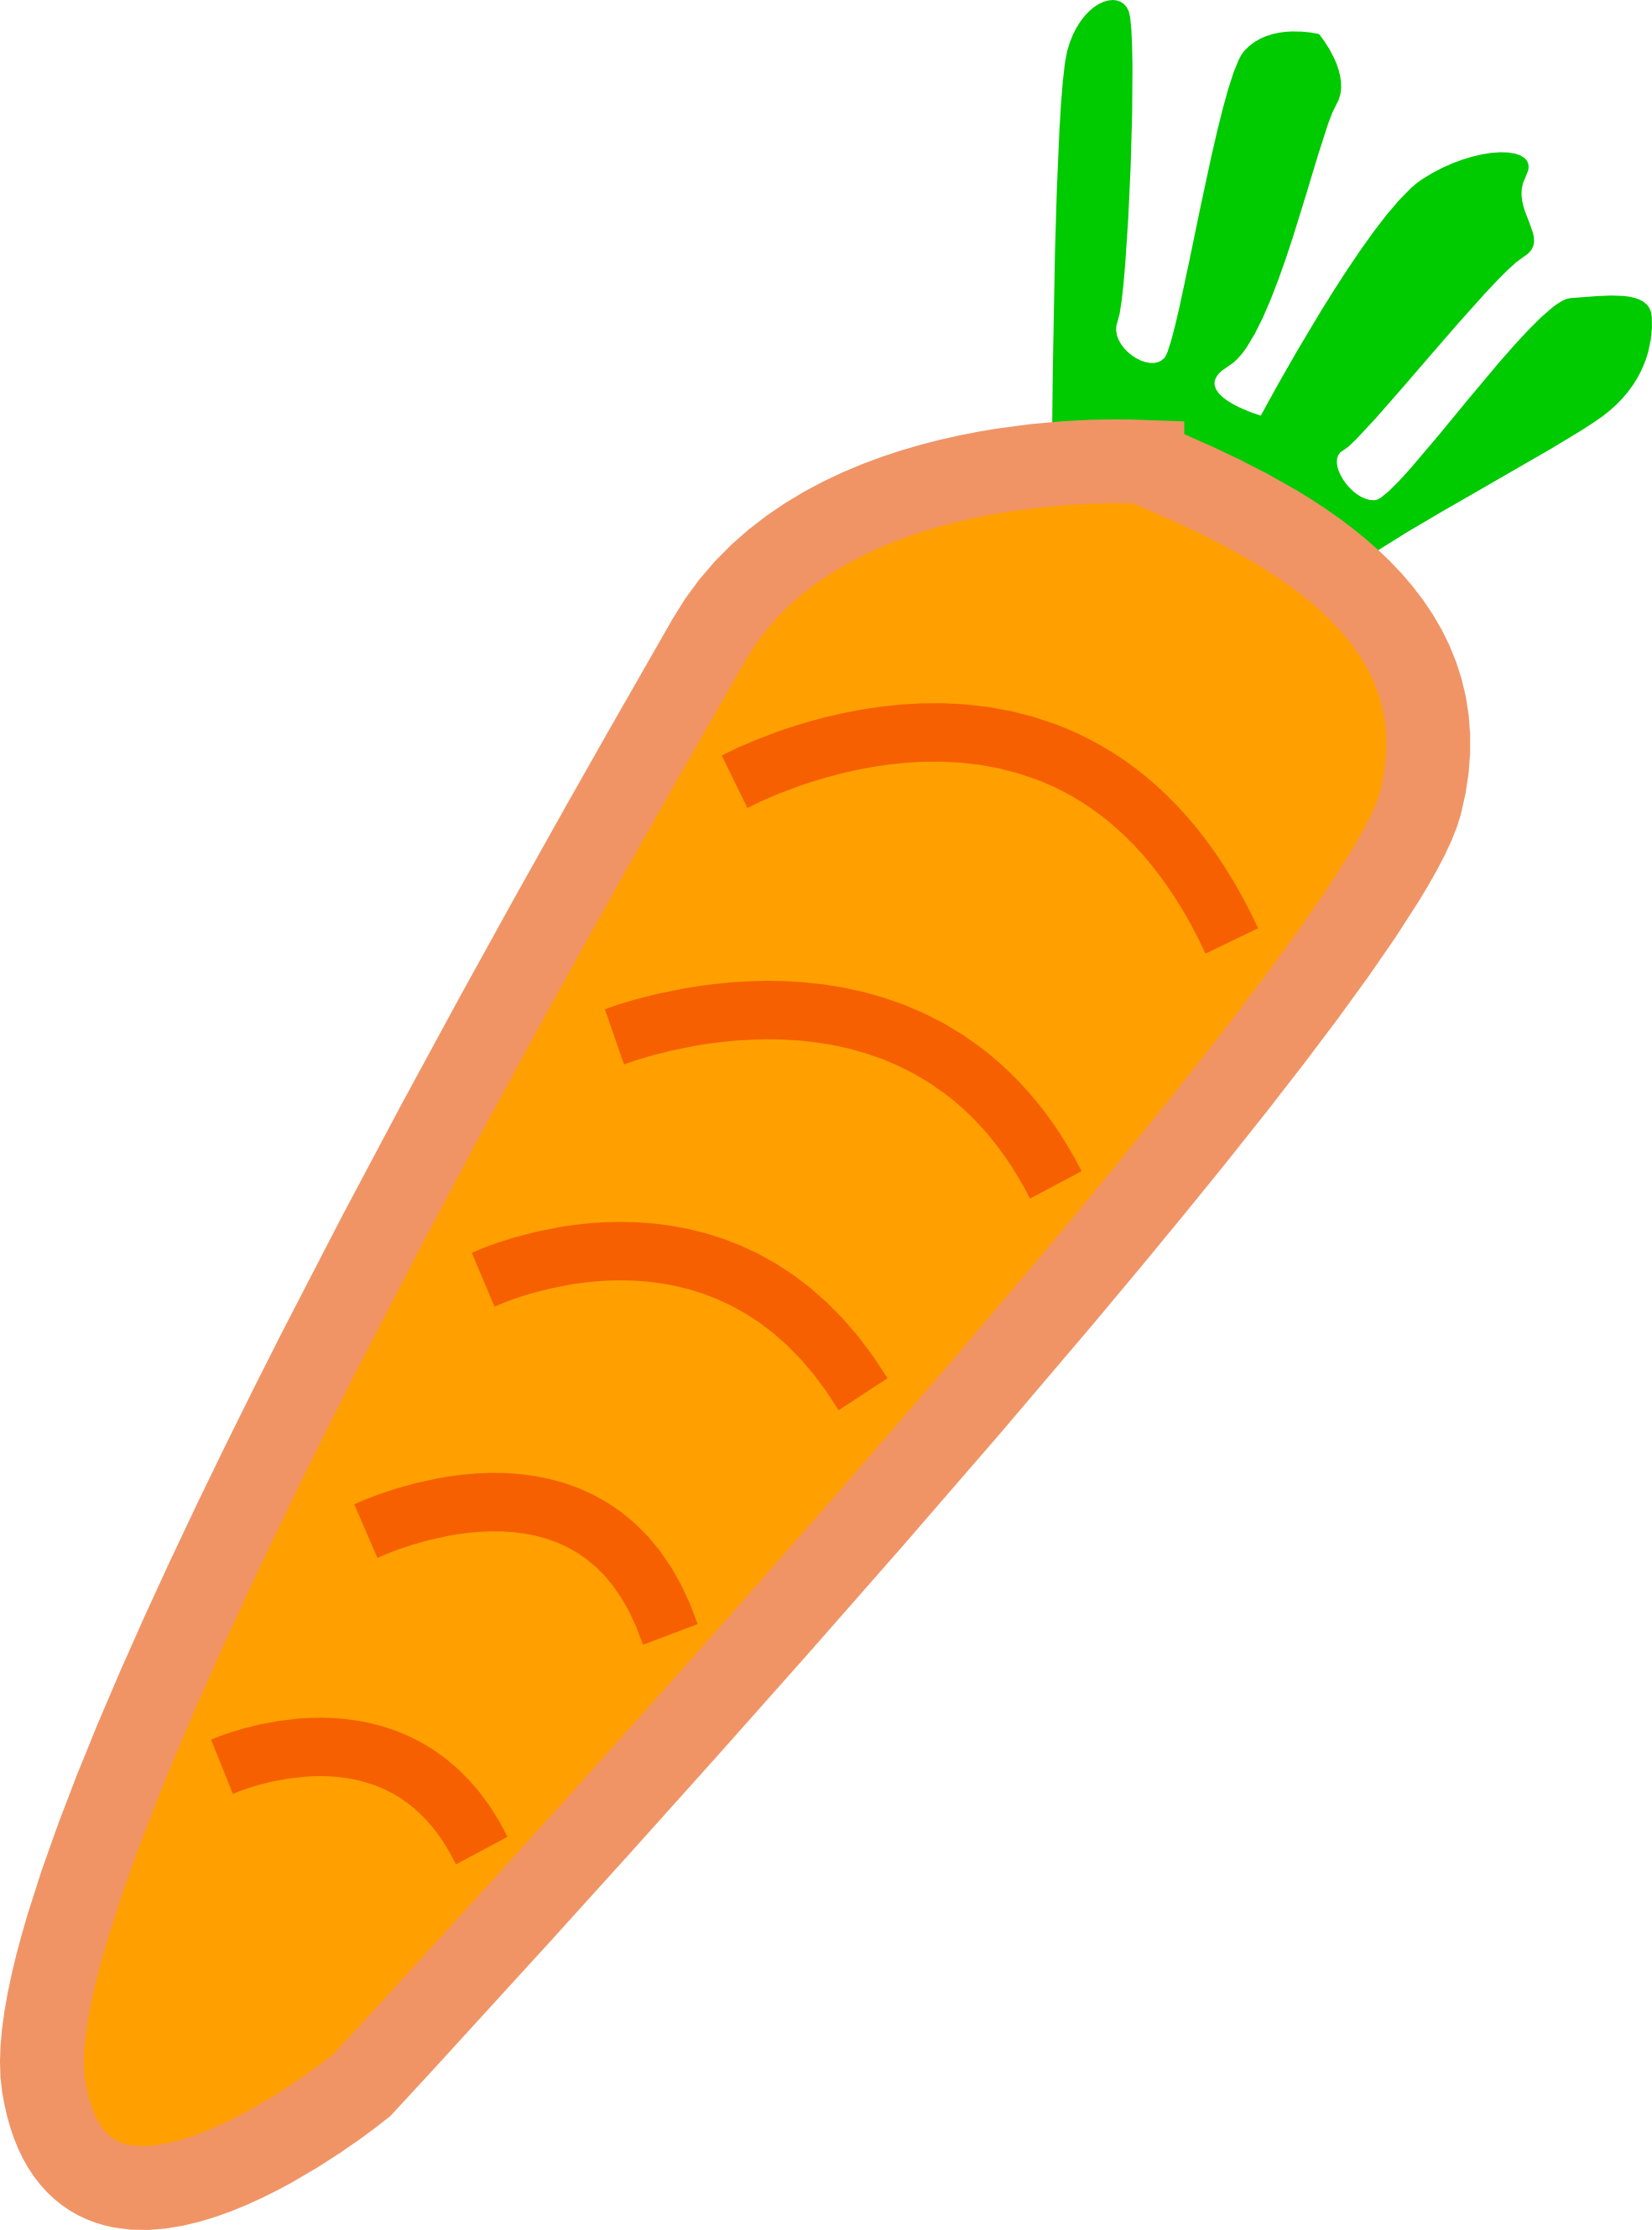 Picture Of Carrots - ClipArt Best